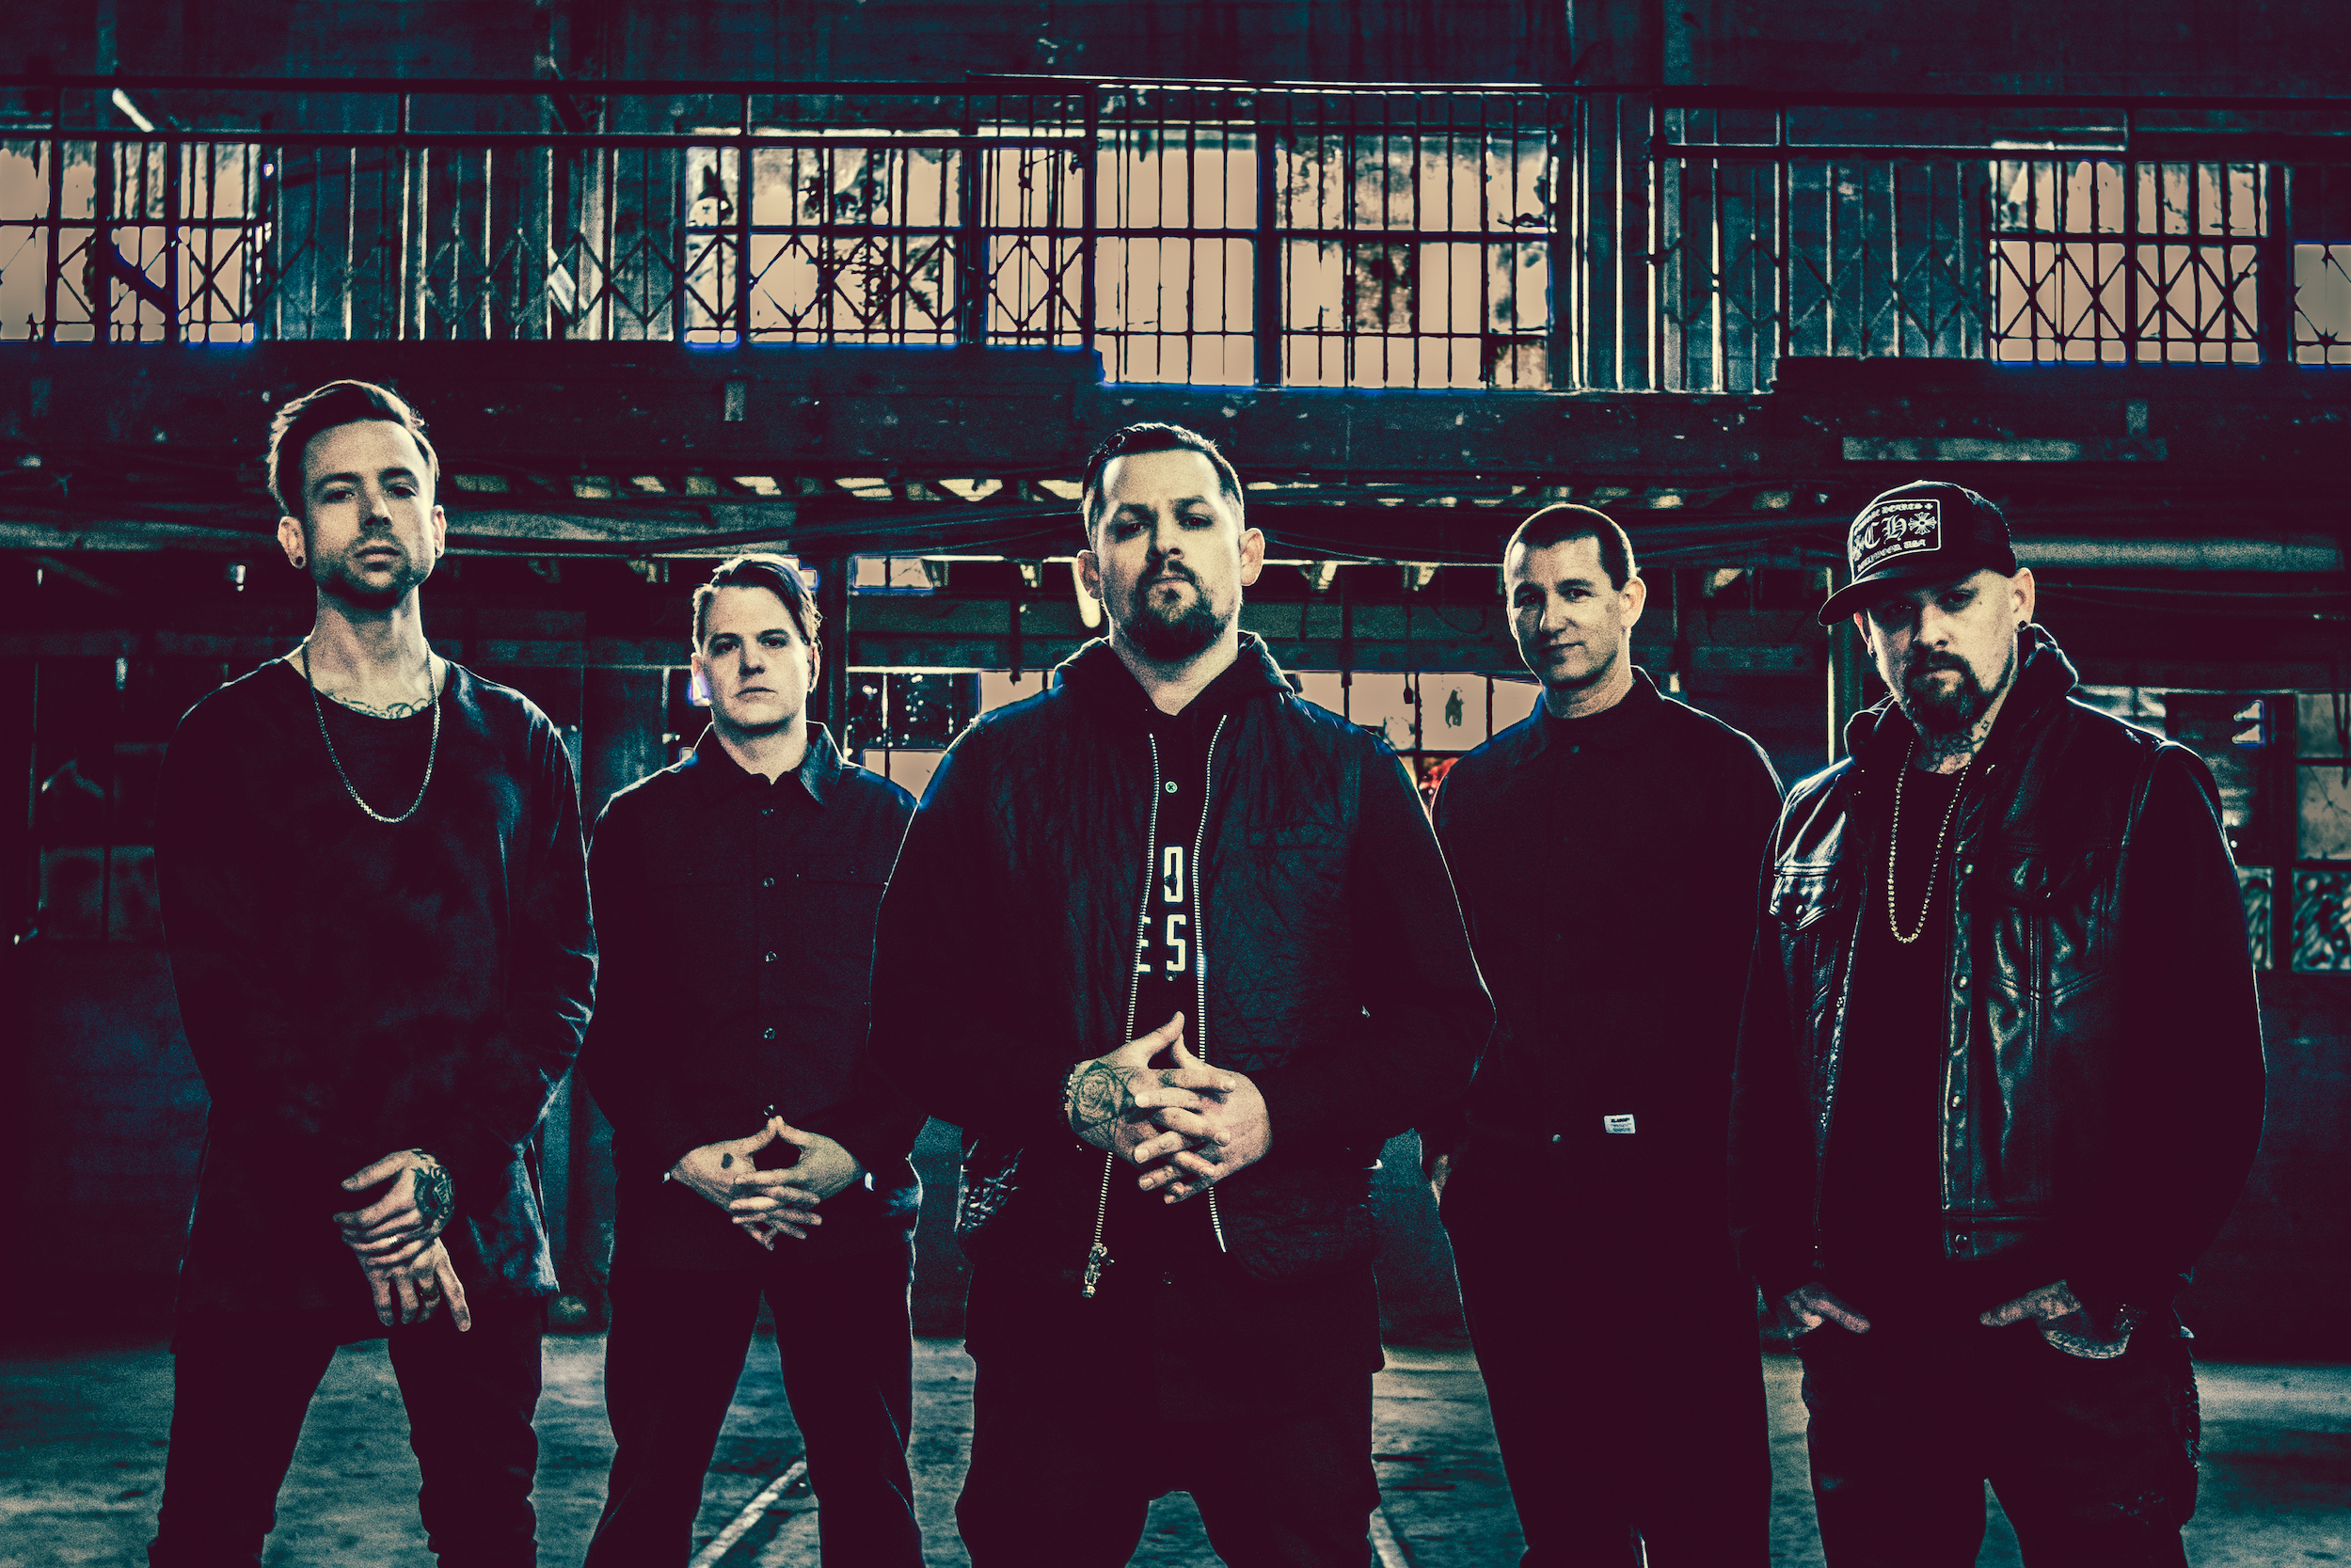 Guitarist Billy Martin of Good Charlotte discusses band’s new album, Generation Rx